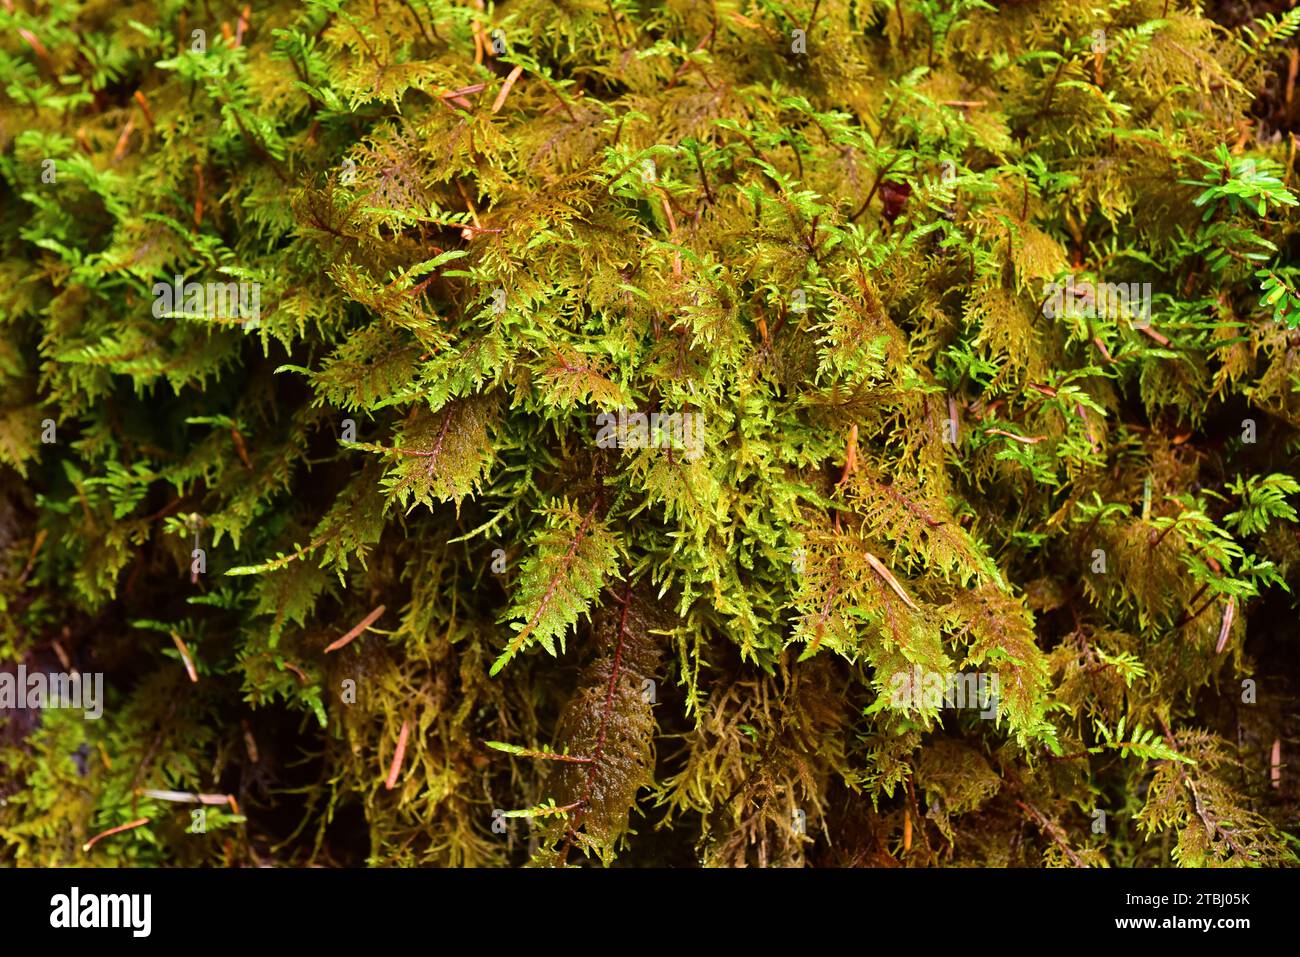 Glittering wood moss or mountain fern moss (Hylocomium splendens) is a moss native to boreal forests. This photo was taken in Valle de Aran, Lleida pr Stock Photo